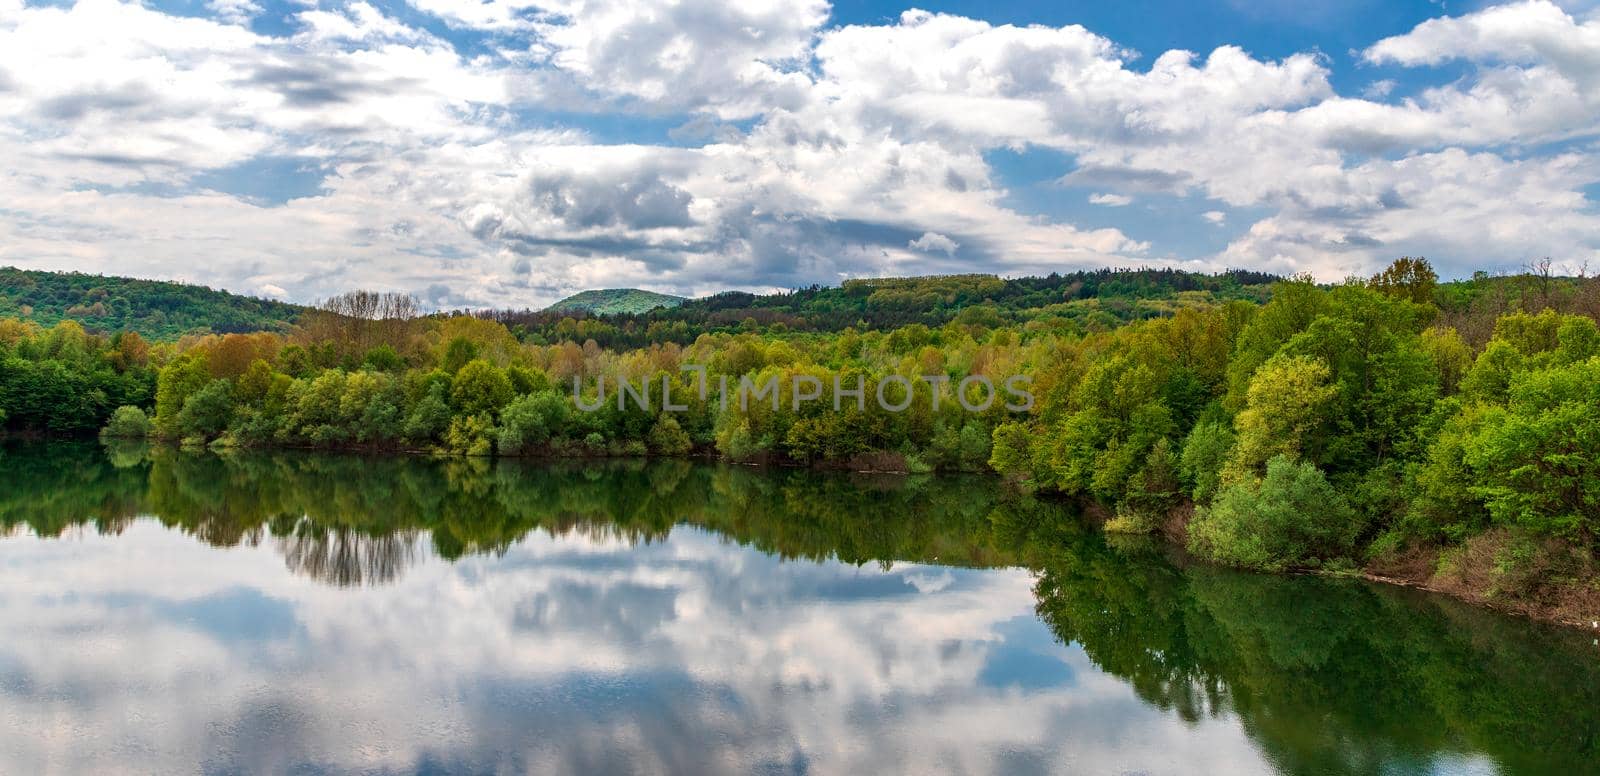 Landscape at the lake with calm water, trees reflection, and beautiful sky by EdVal